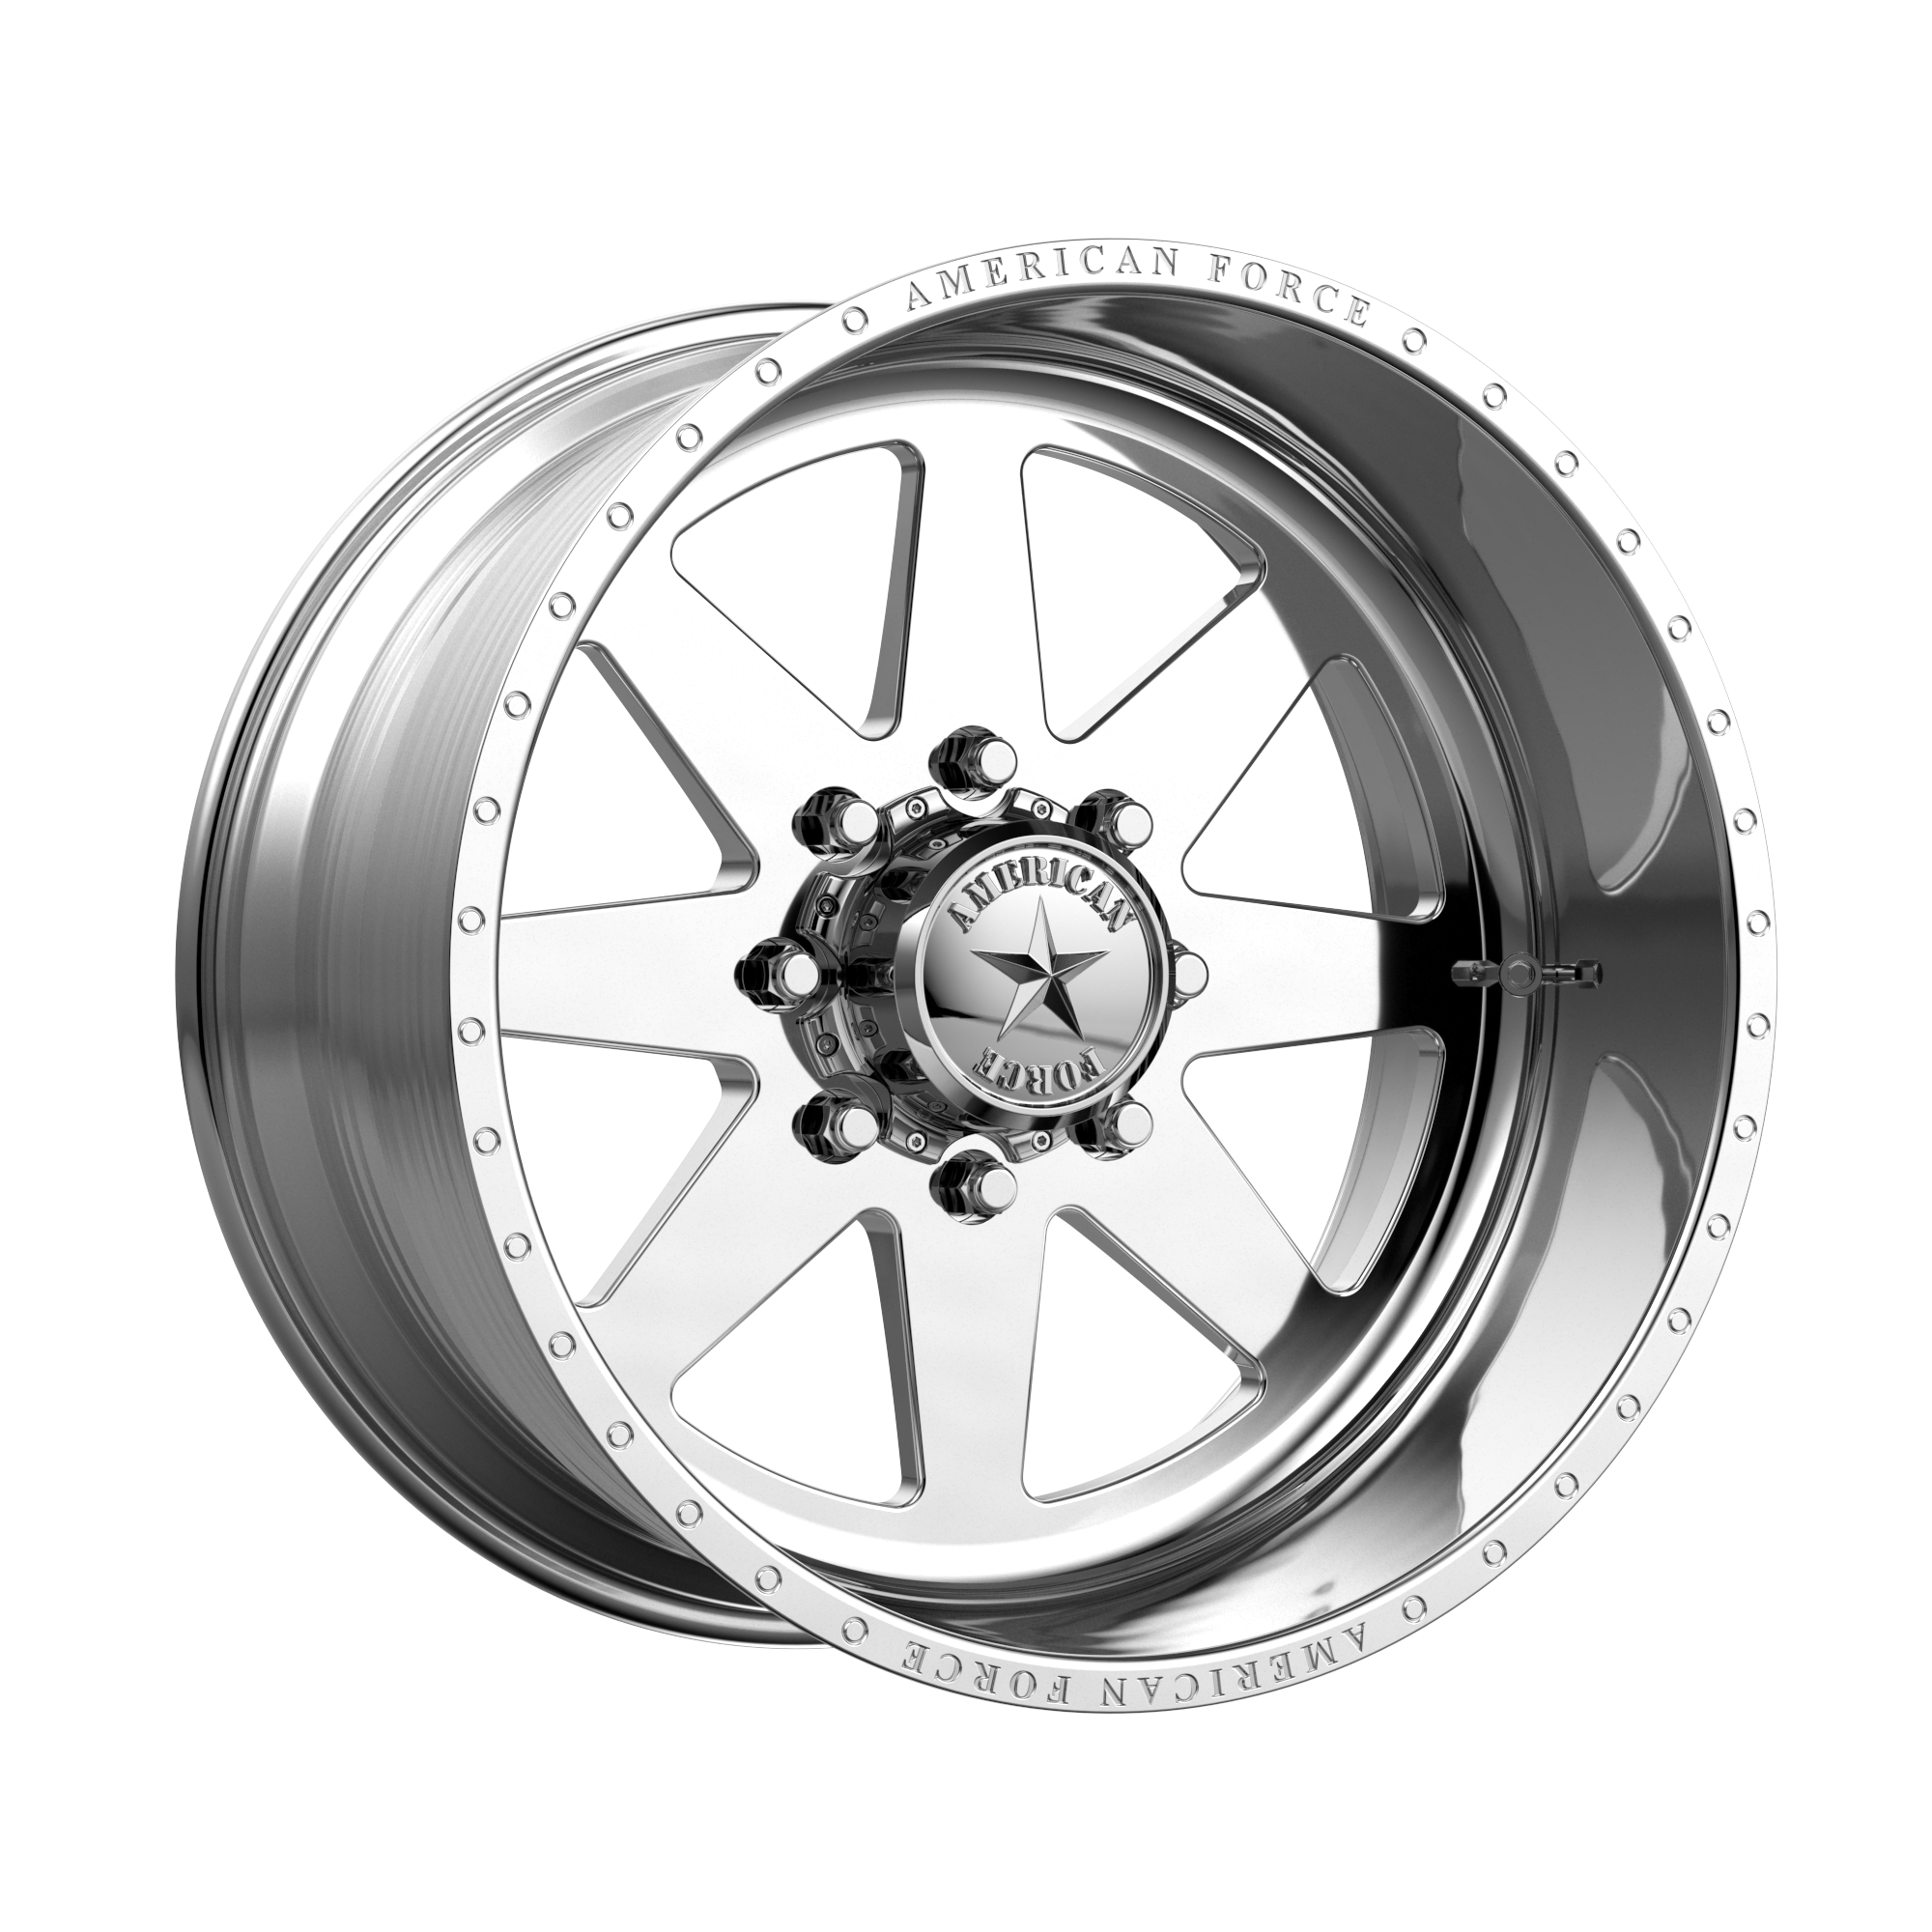 INDEPENDENCE SS 26x12 6x135.00 POLISHED (-40 mm) - Tires and Engine Performance